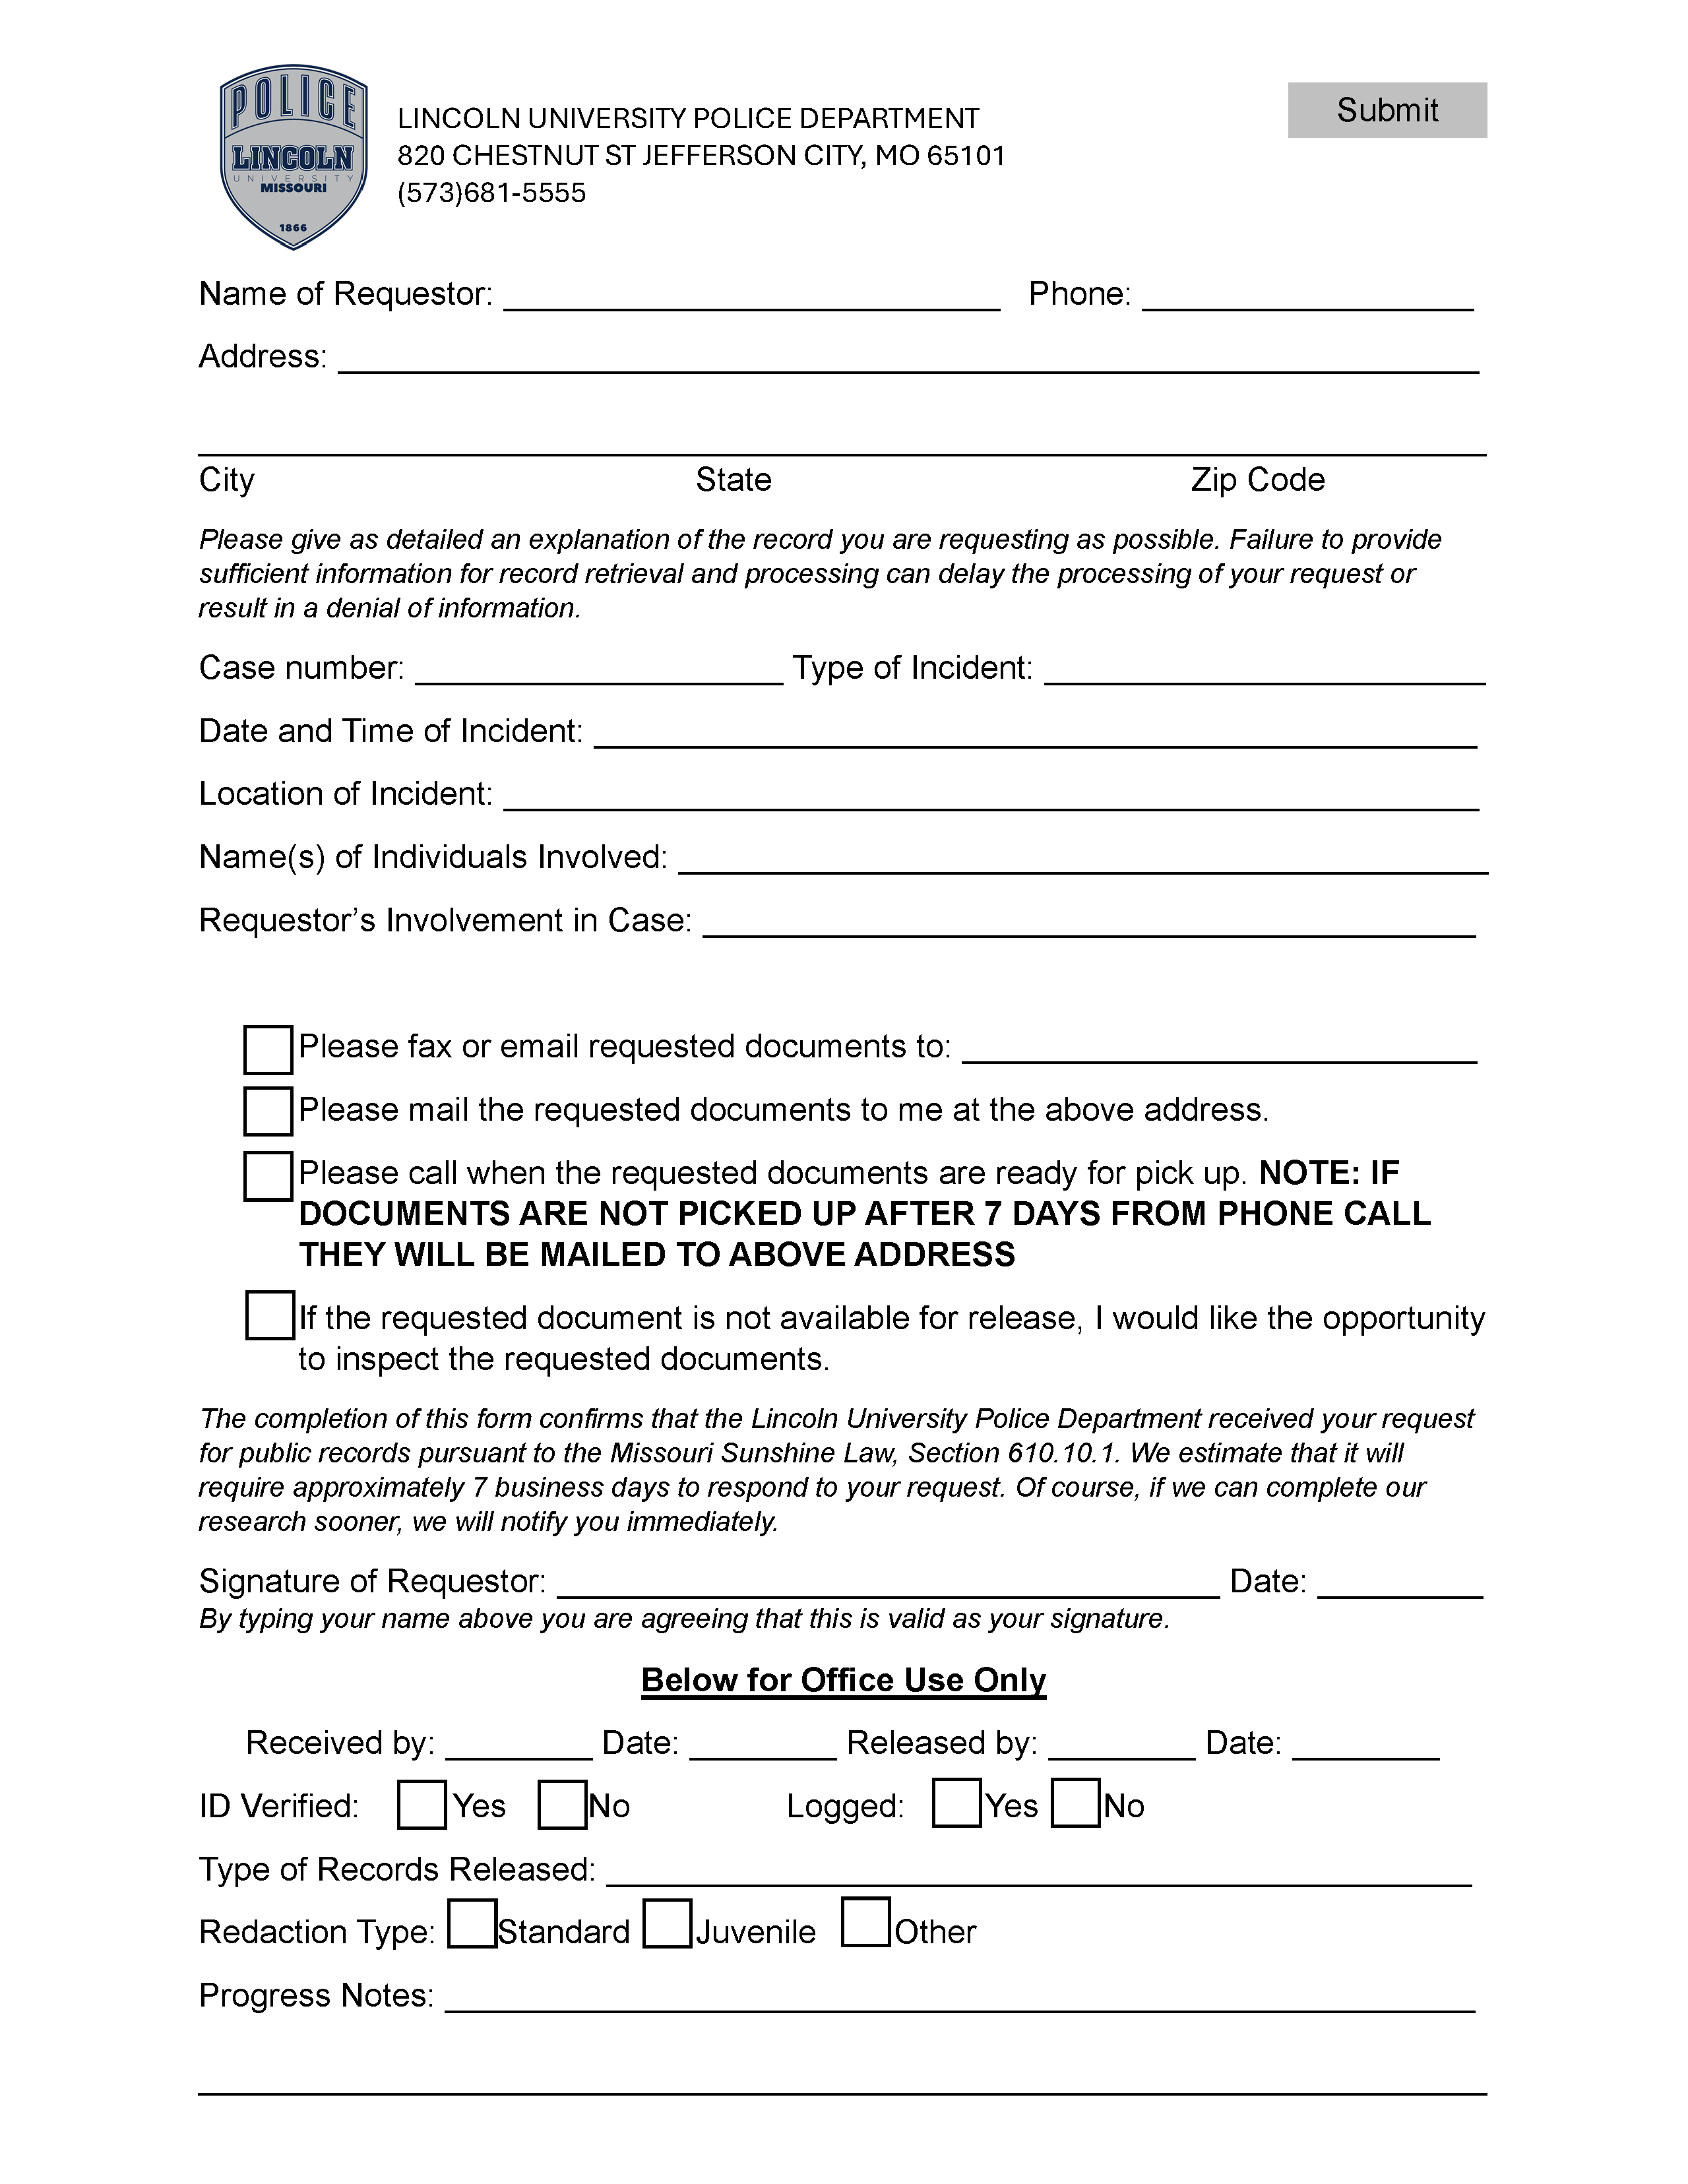 lupd-records-request-form.png